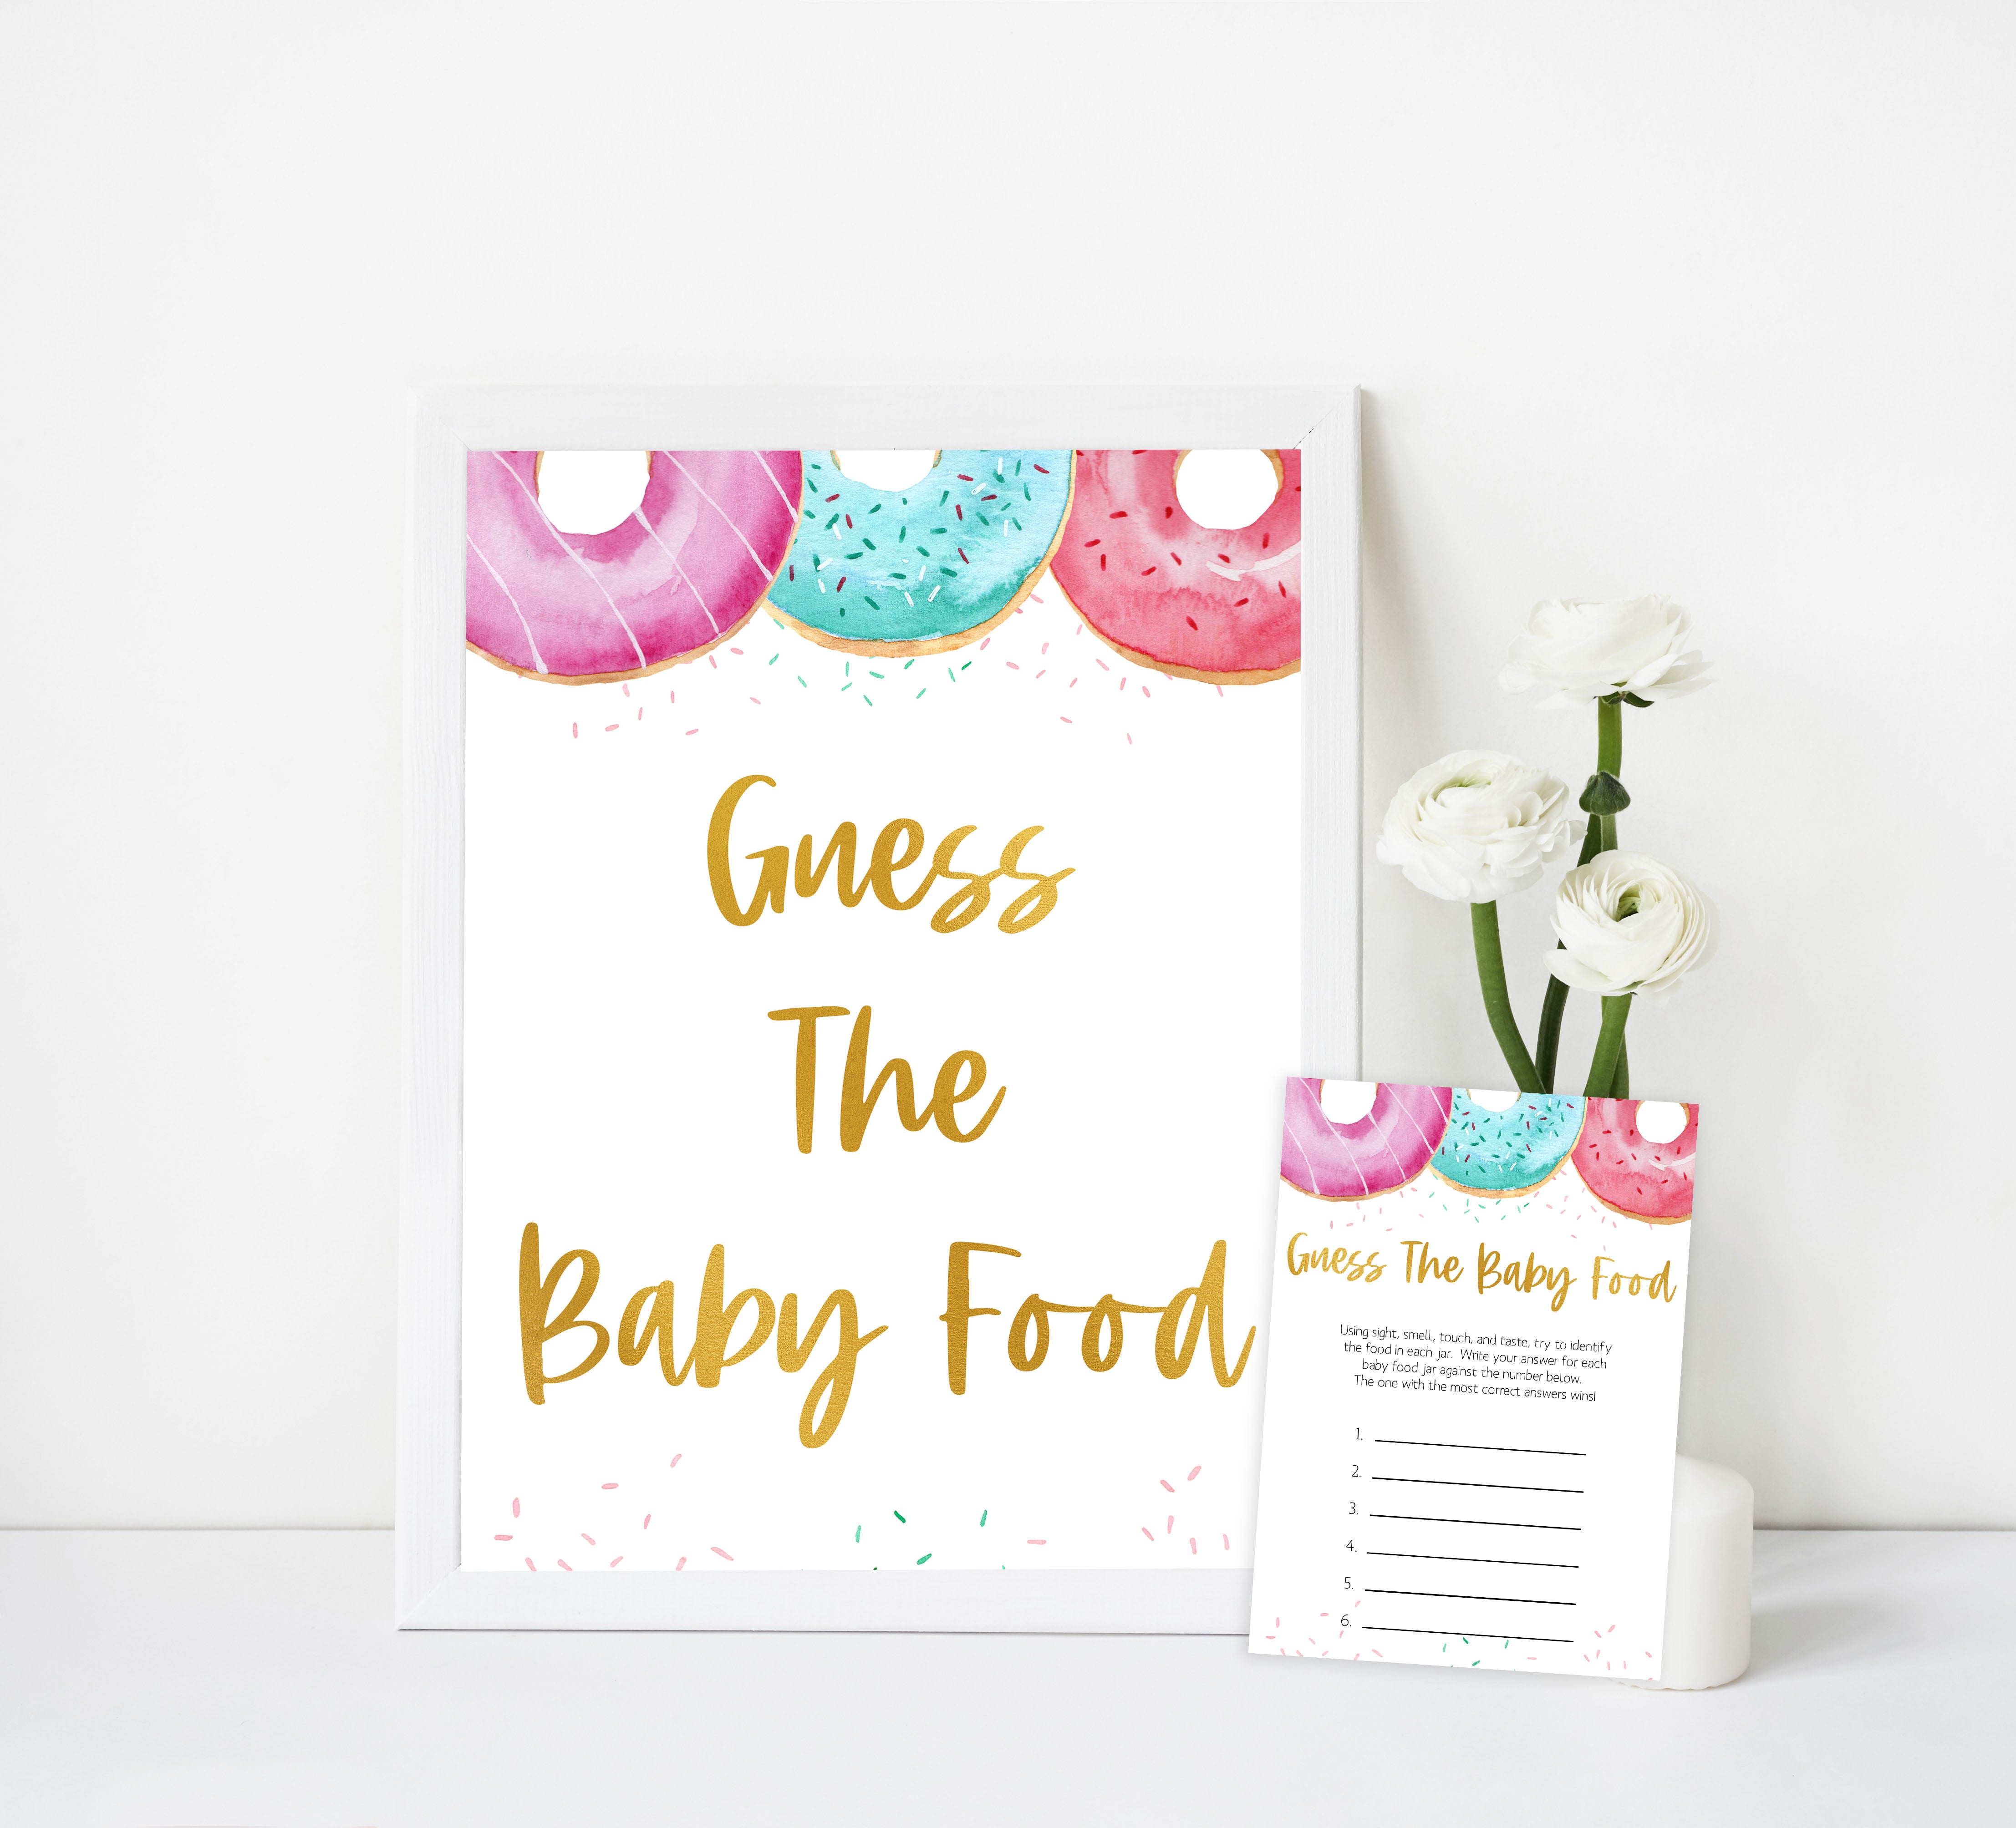 guess the baby food game, Printable baby shower games, donut baby games, baby shower games, fun baby shower ideas, top baby shower ideas, donut sprinkles baby shower, baby shower games, fun donut baby shower ideas